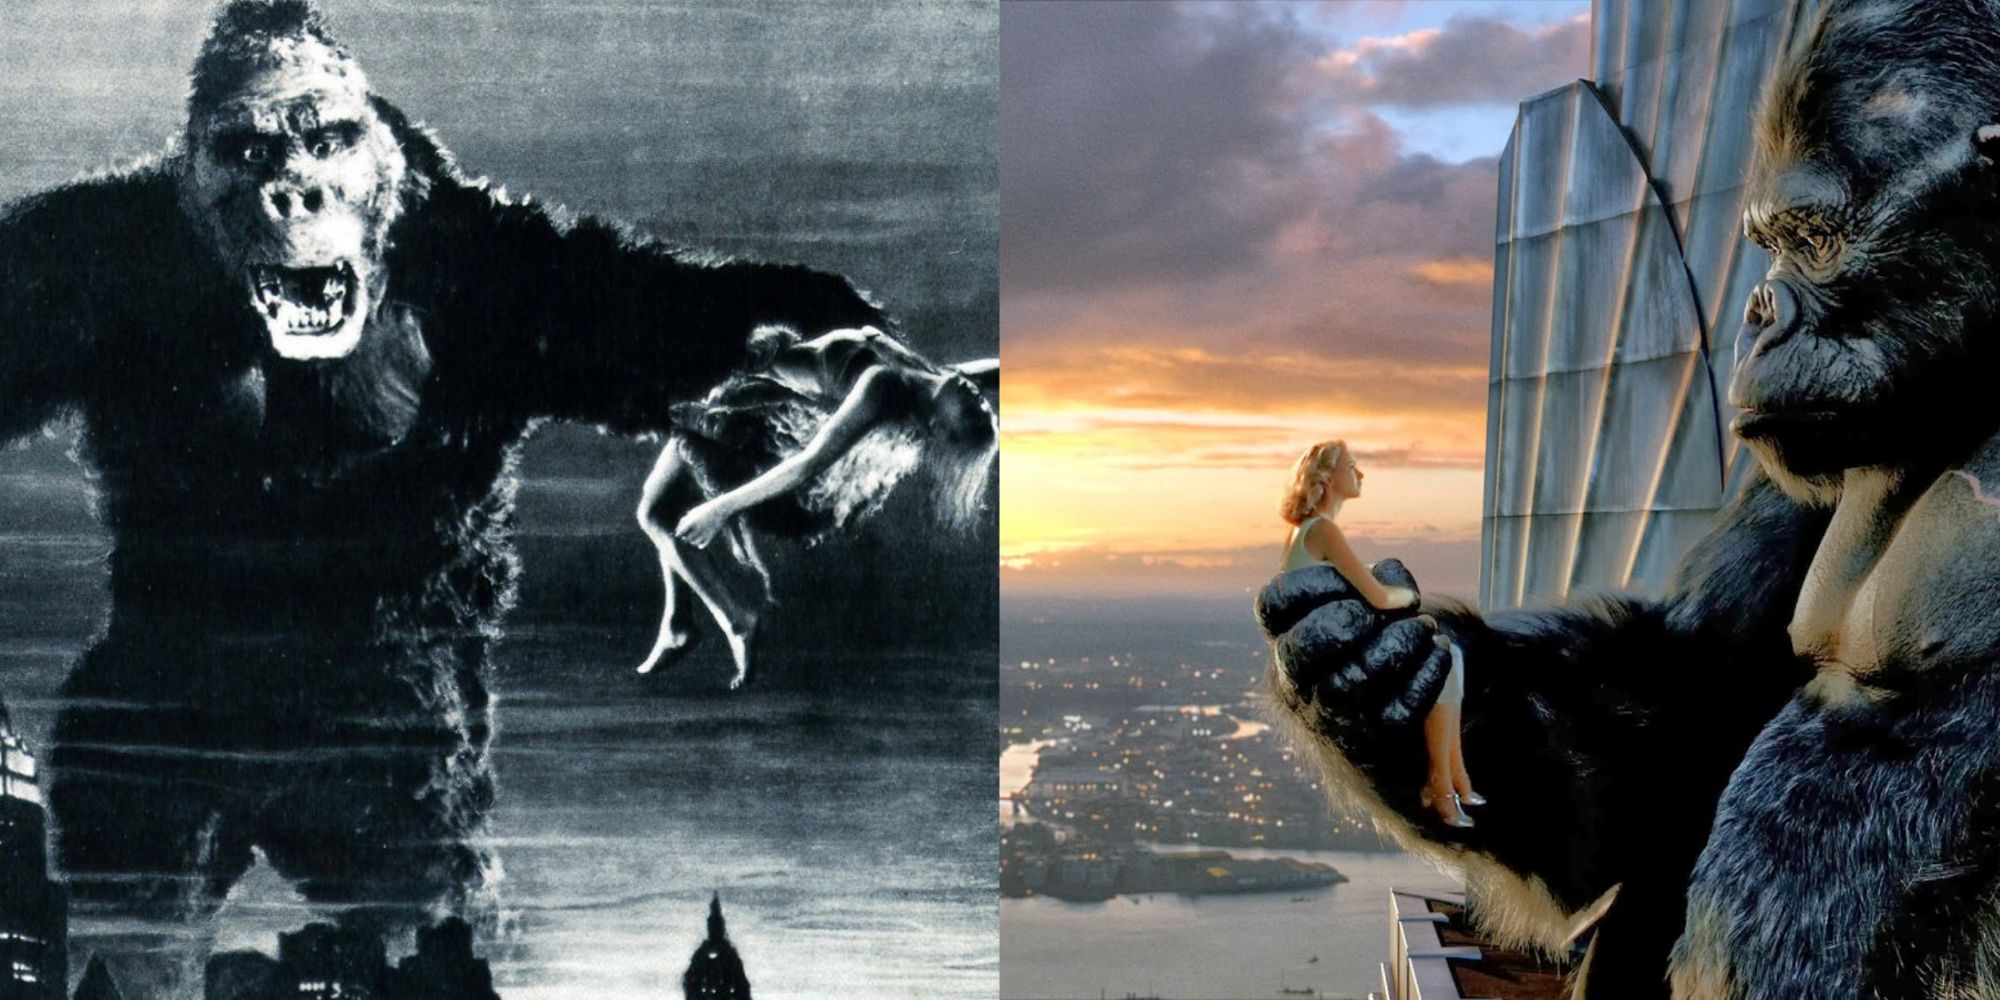 King Kong (1933 and 2005) on top of the Empire State holding a woman